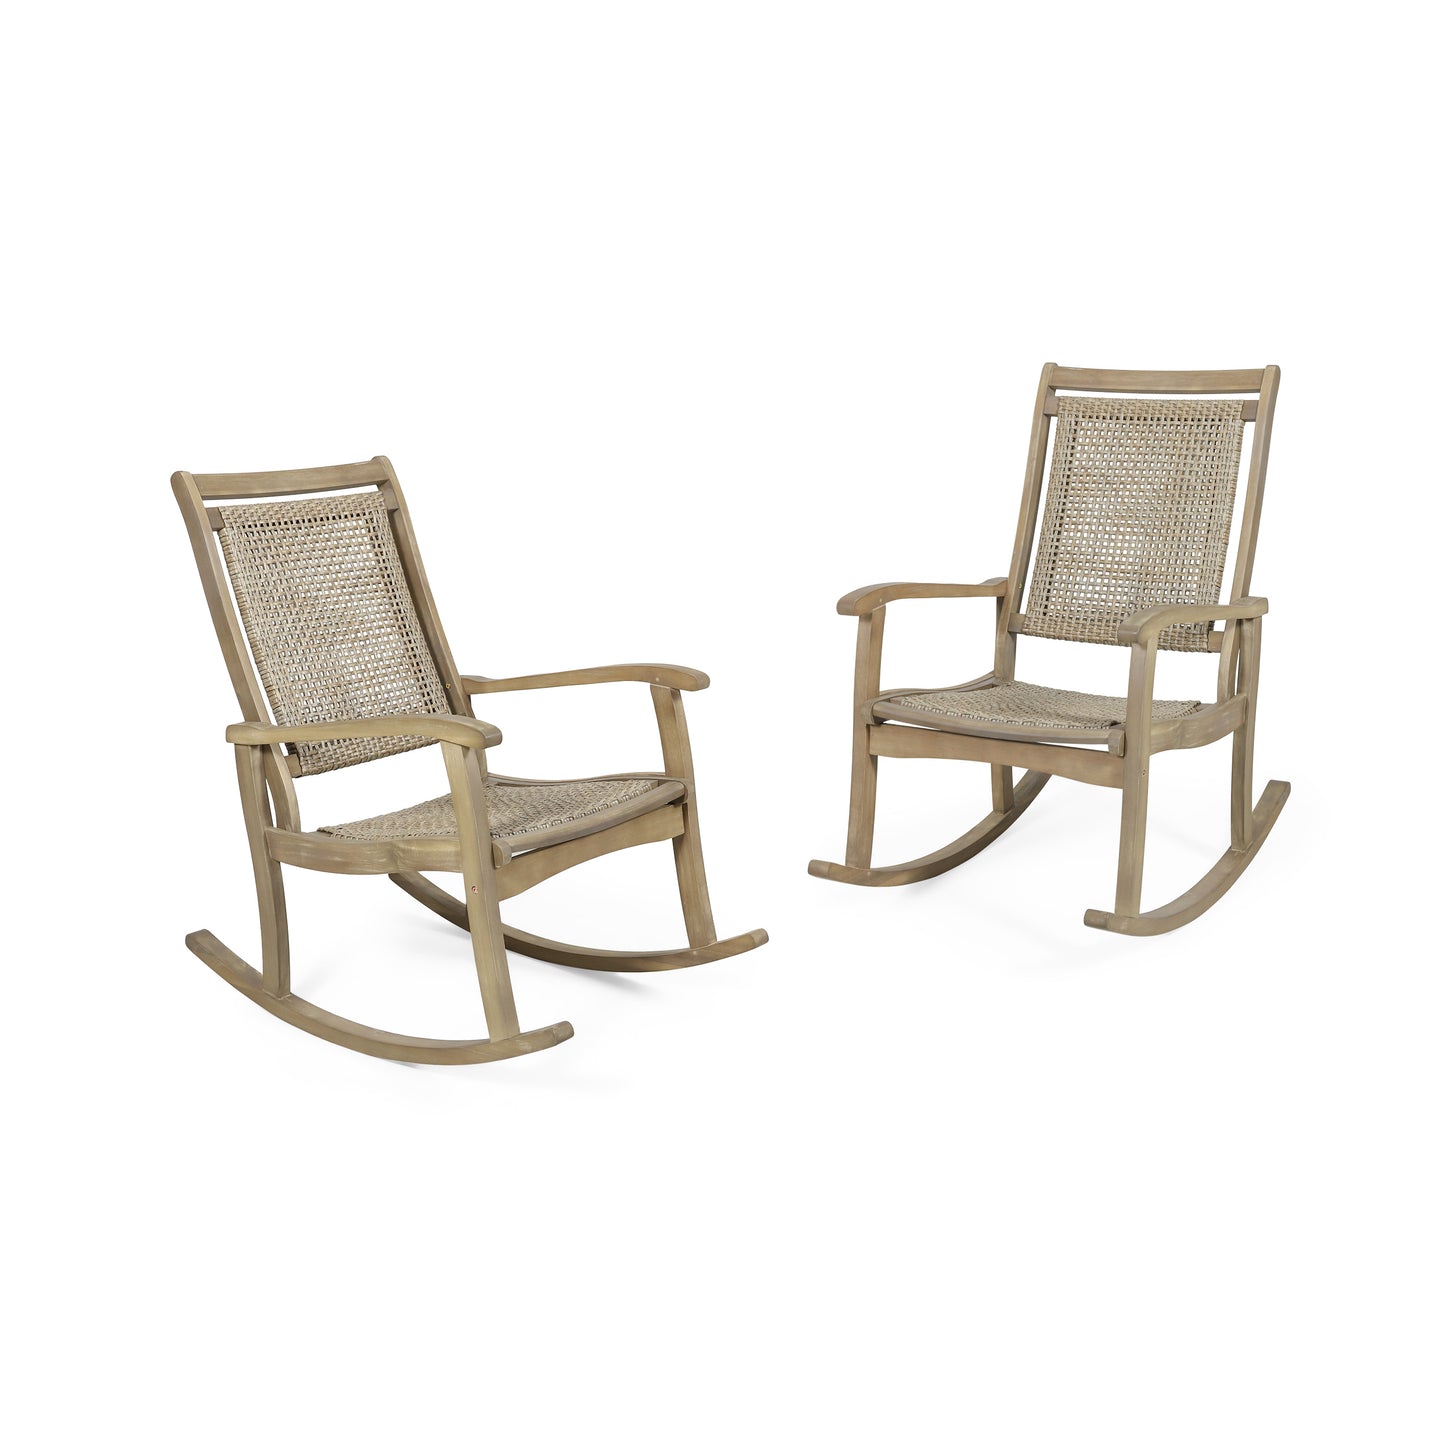 Dory Outdoor Rustic Wicker Rocking Chairs (Set of 2)